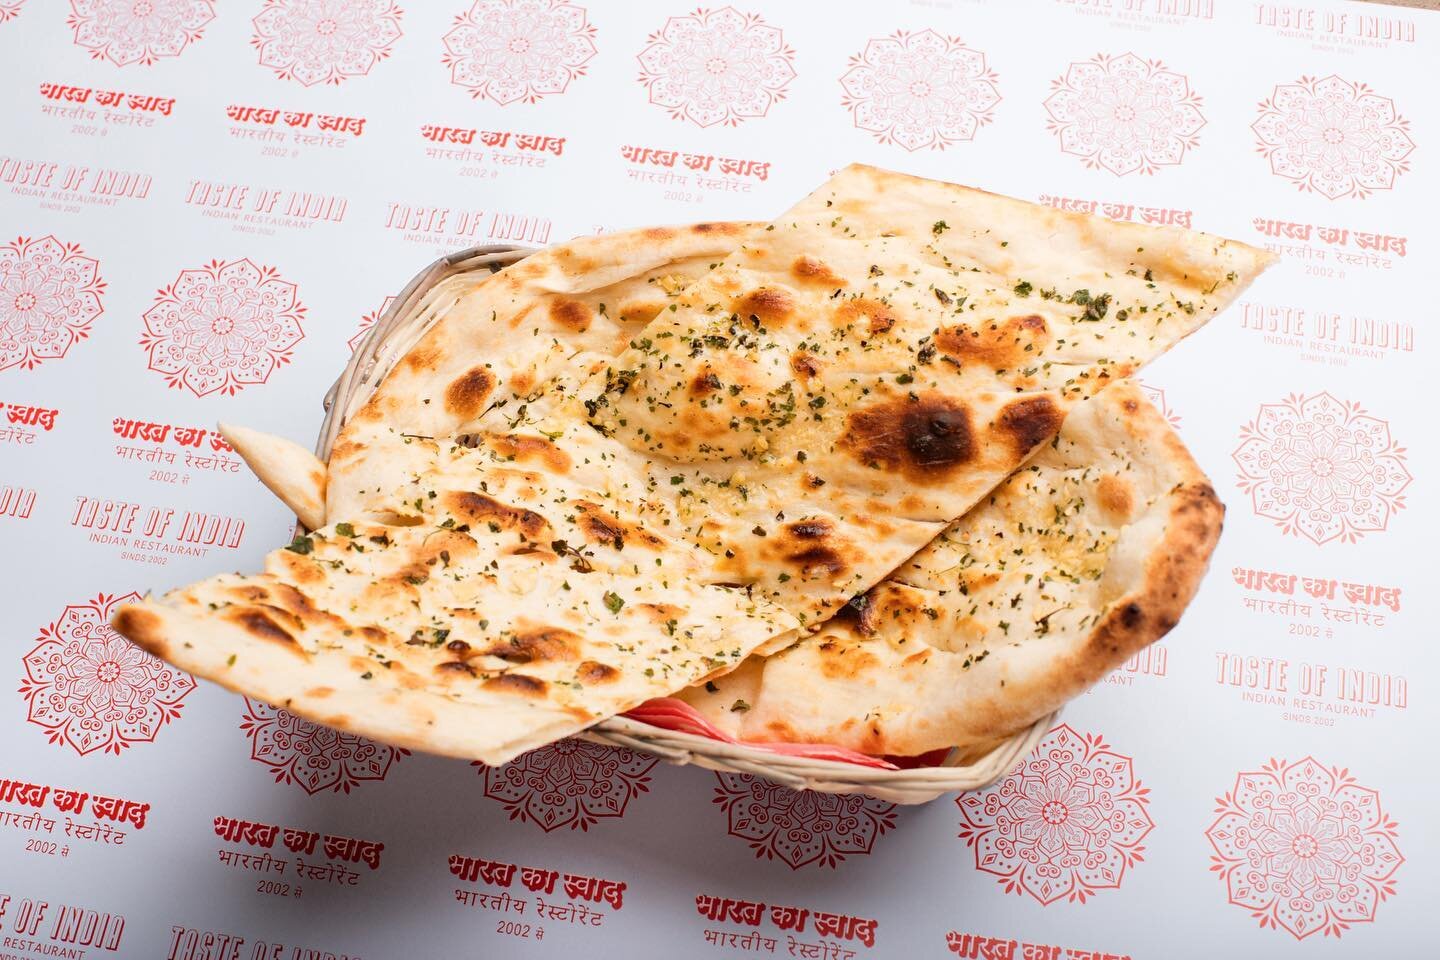 There's nothing like dipping naan
straight out of the tandoor into a delicious curry.
We take naan very seriously, offering seven unique options to
choose from. Which one are you ordering?
* Cheesy Garlic Naan
* Tandoori Roti
* Garlic Naan
* Peshwari